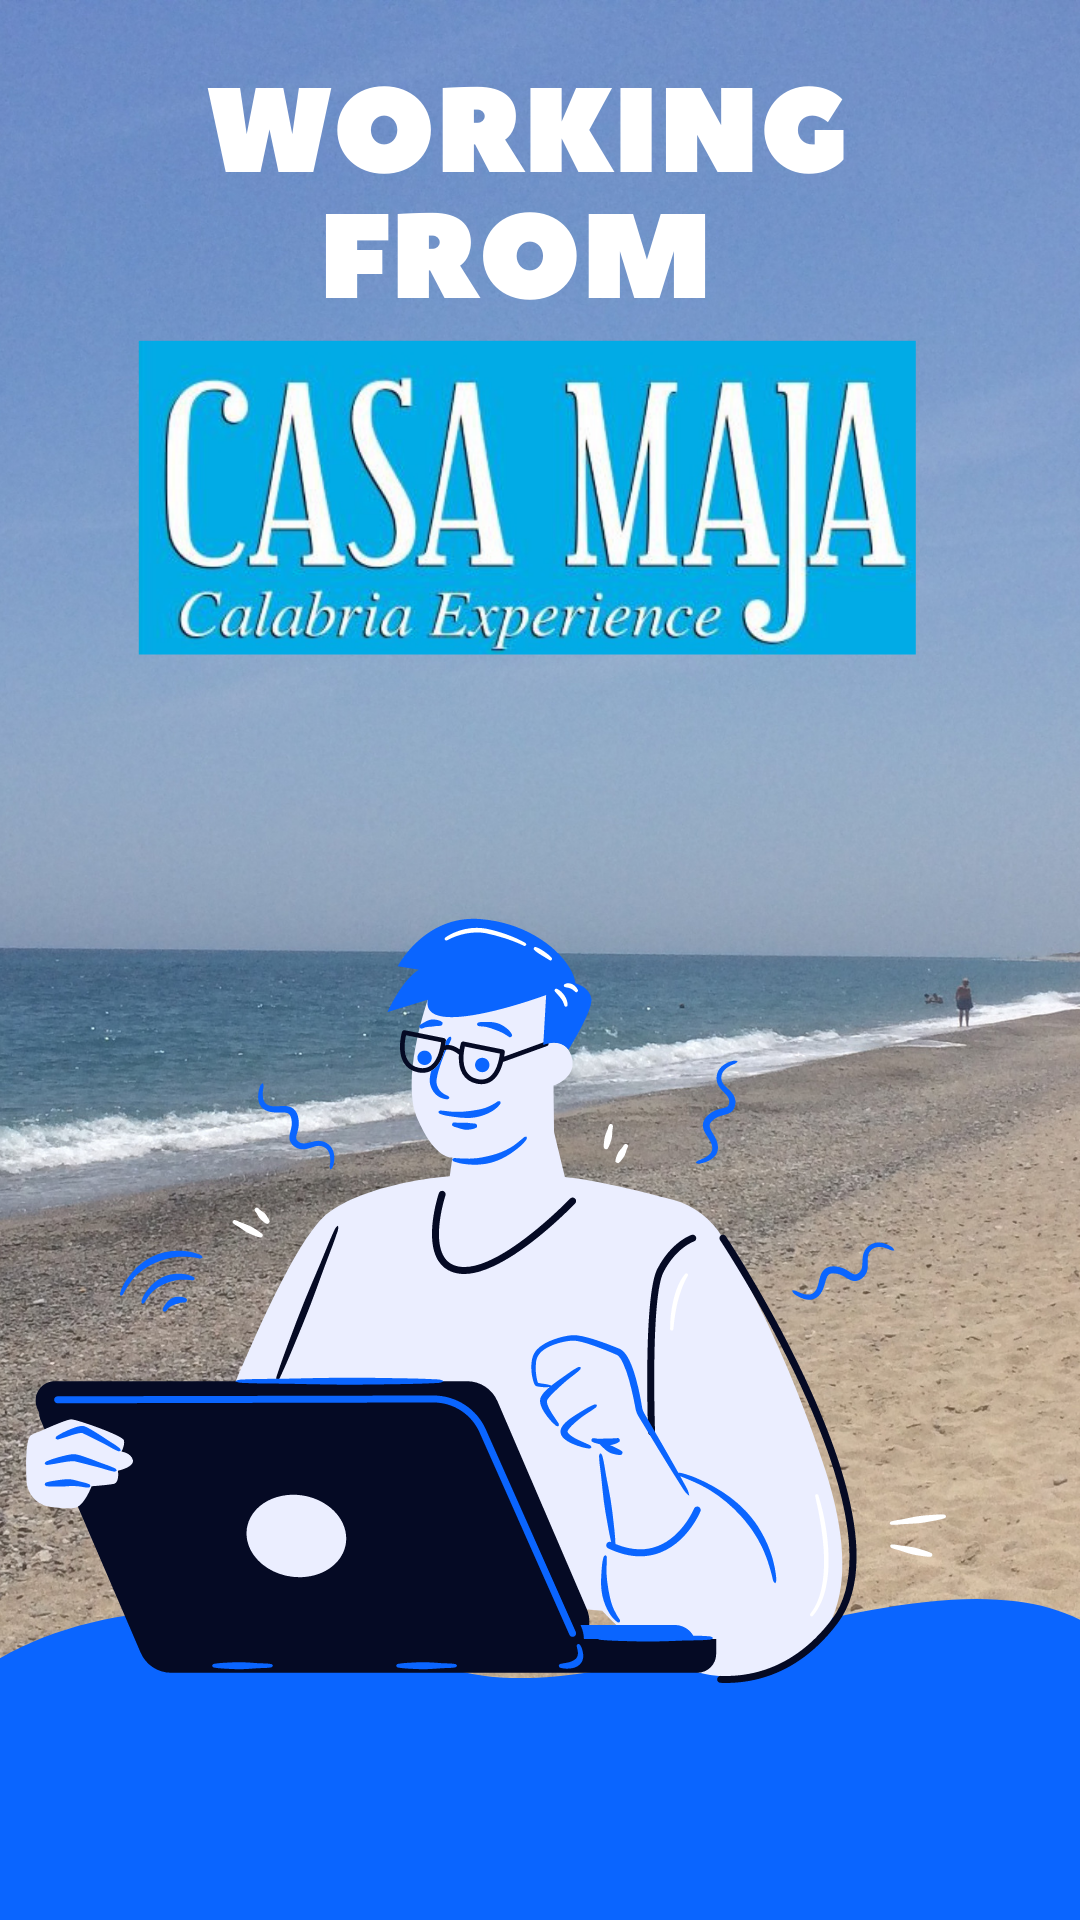 Why should you work remotely from Casa Maja in the South of Italy – Calabria?